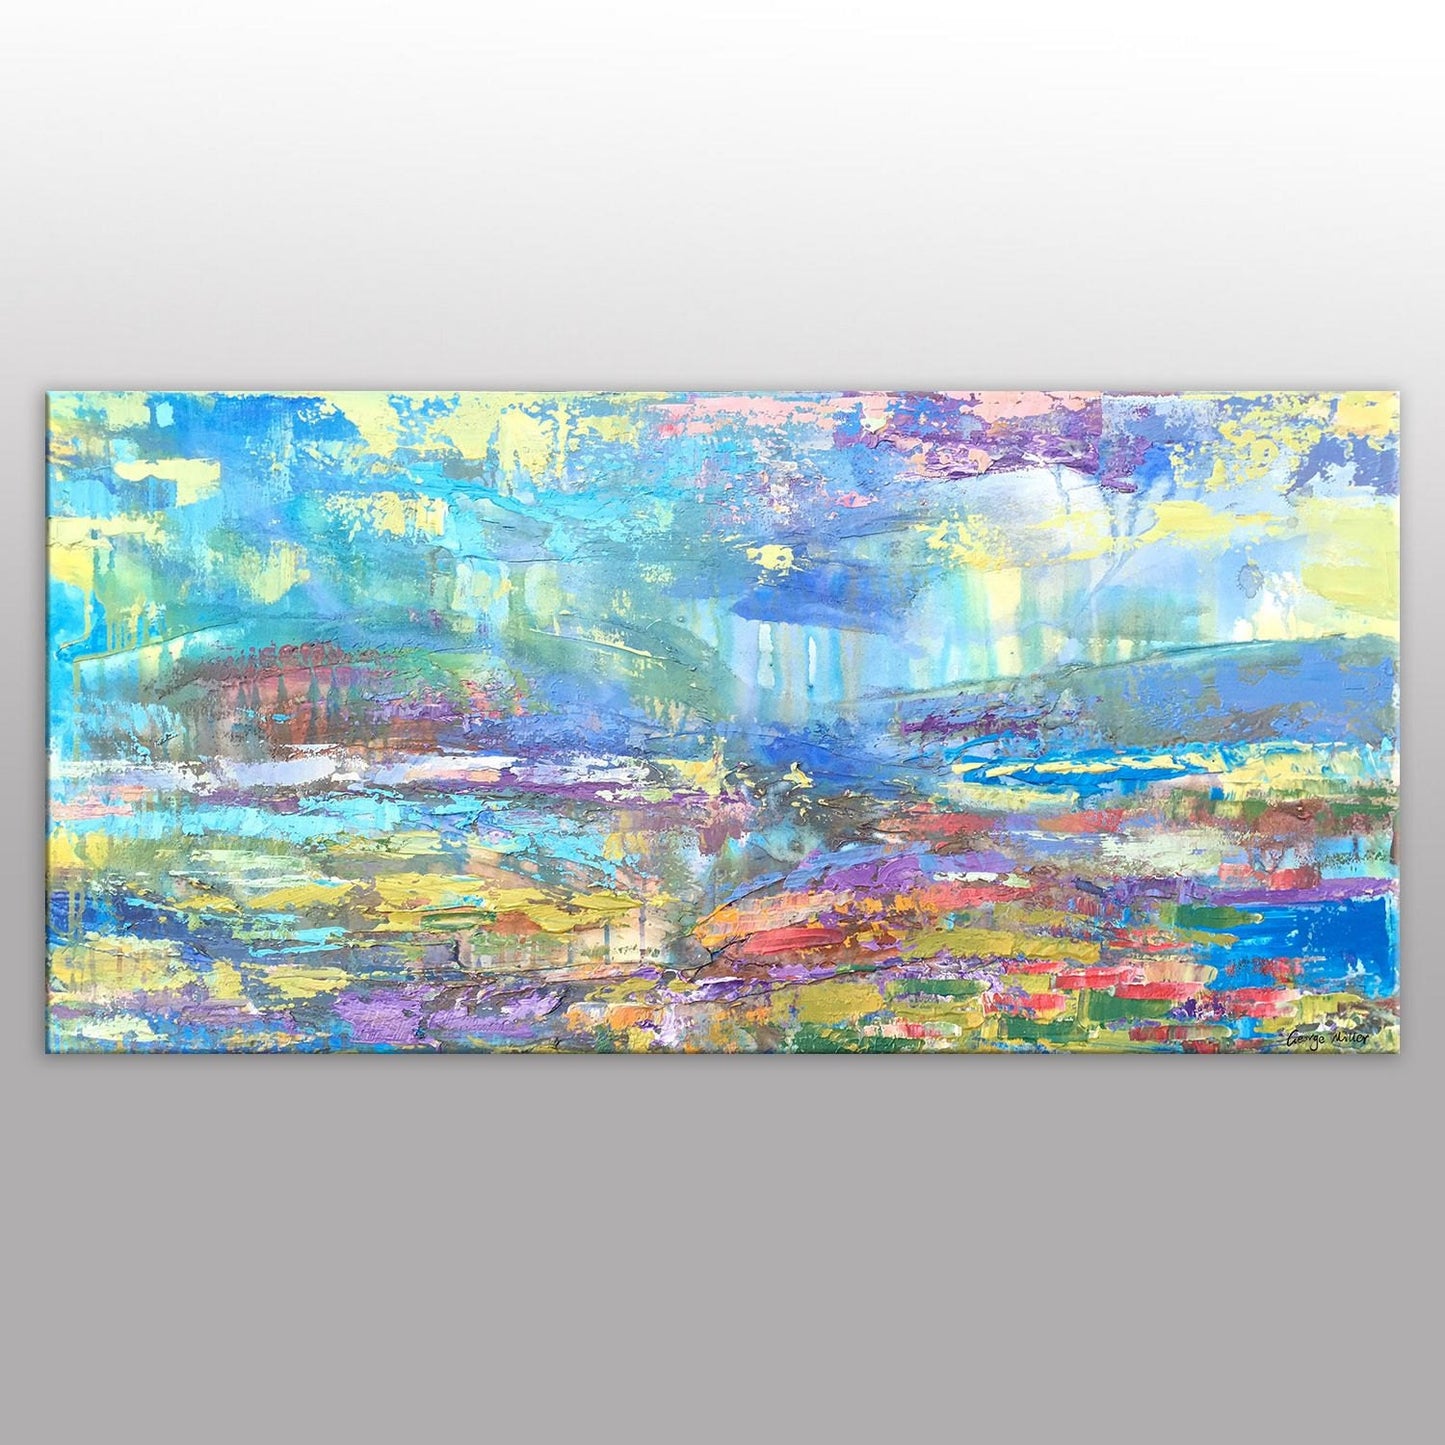 Abstract Painting, Abstract Canvas Painting, Blue, Original Abstract Art, Abstract Landscape Painting, Abstract Art, Modern Painting